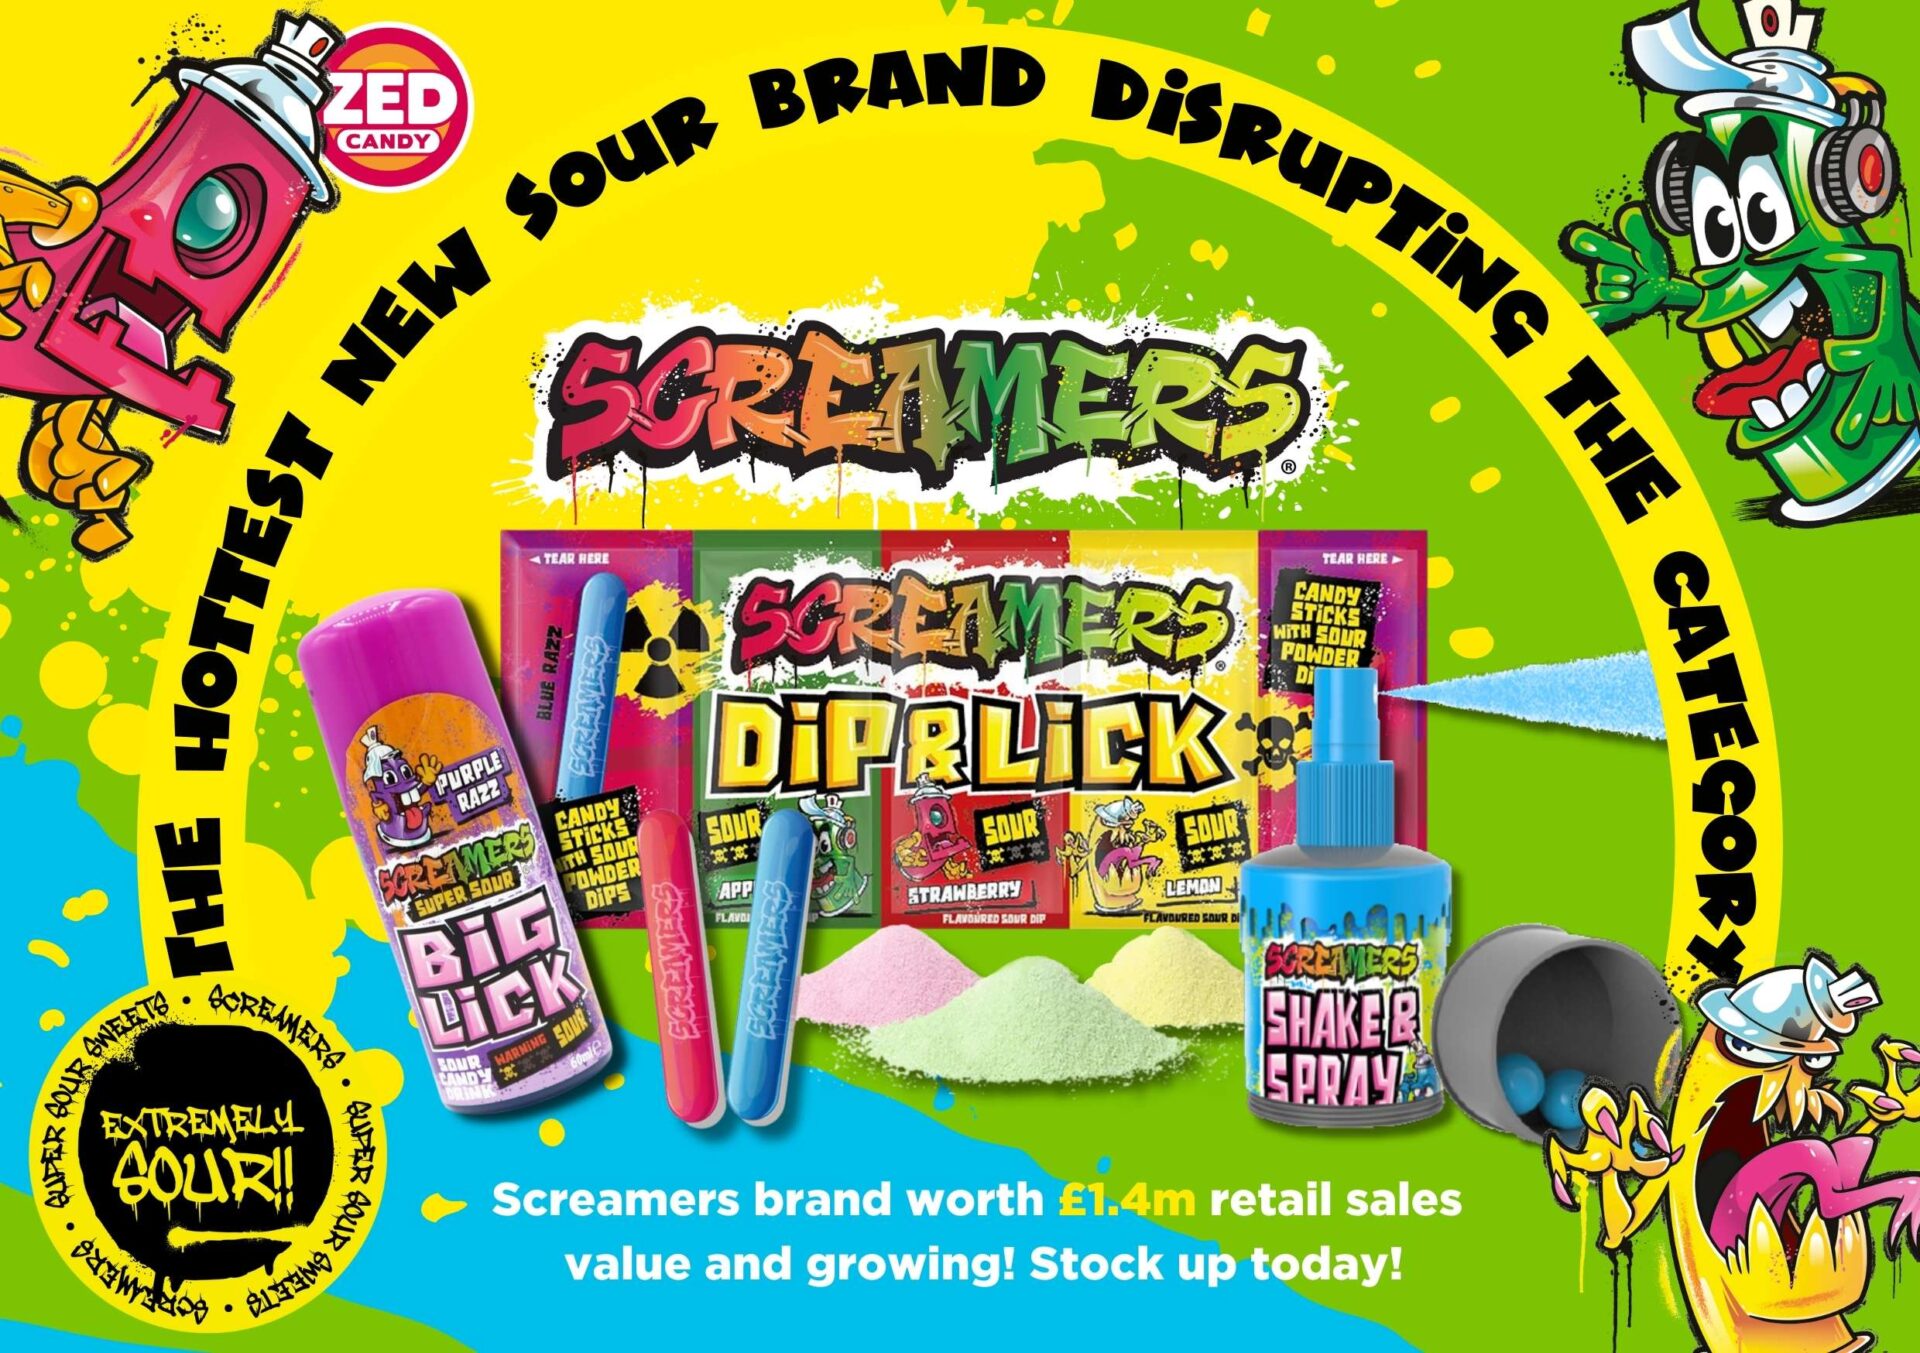 The new sour brand disrupting the novelty category